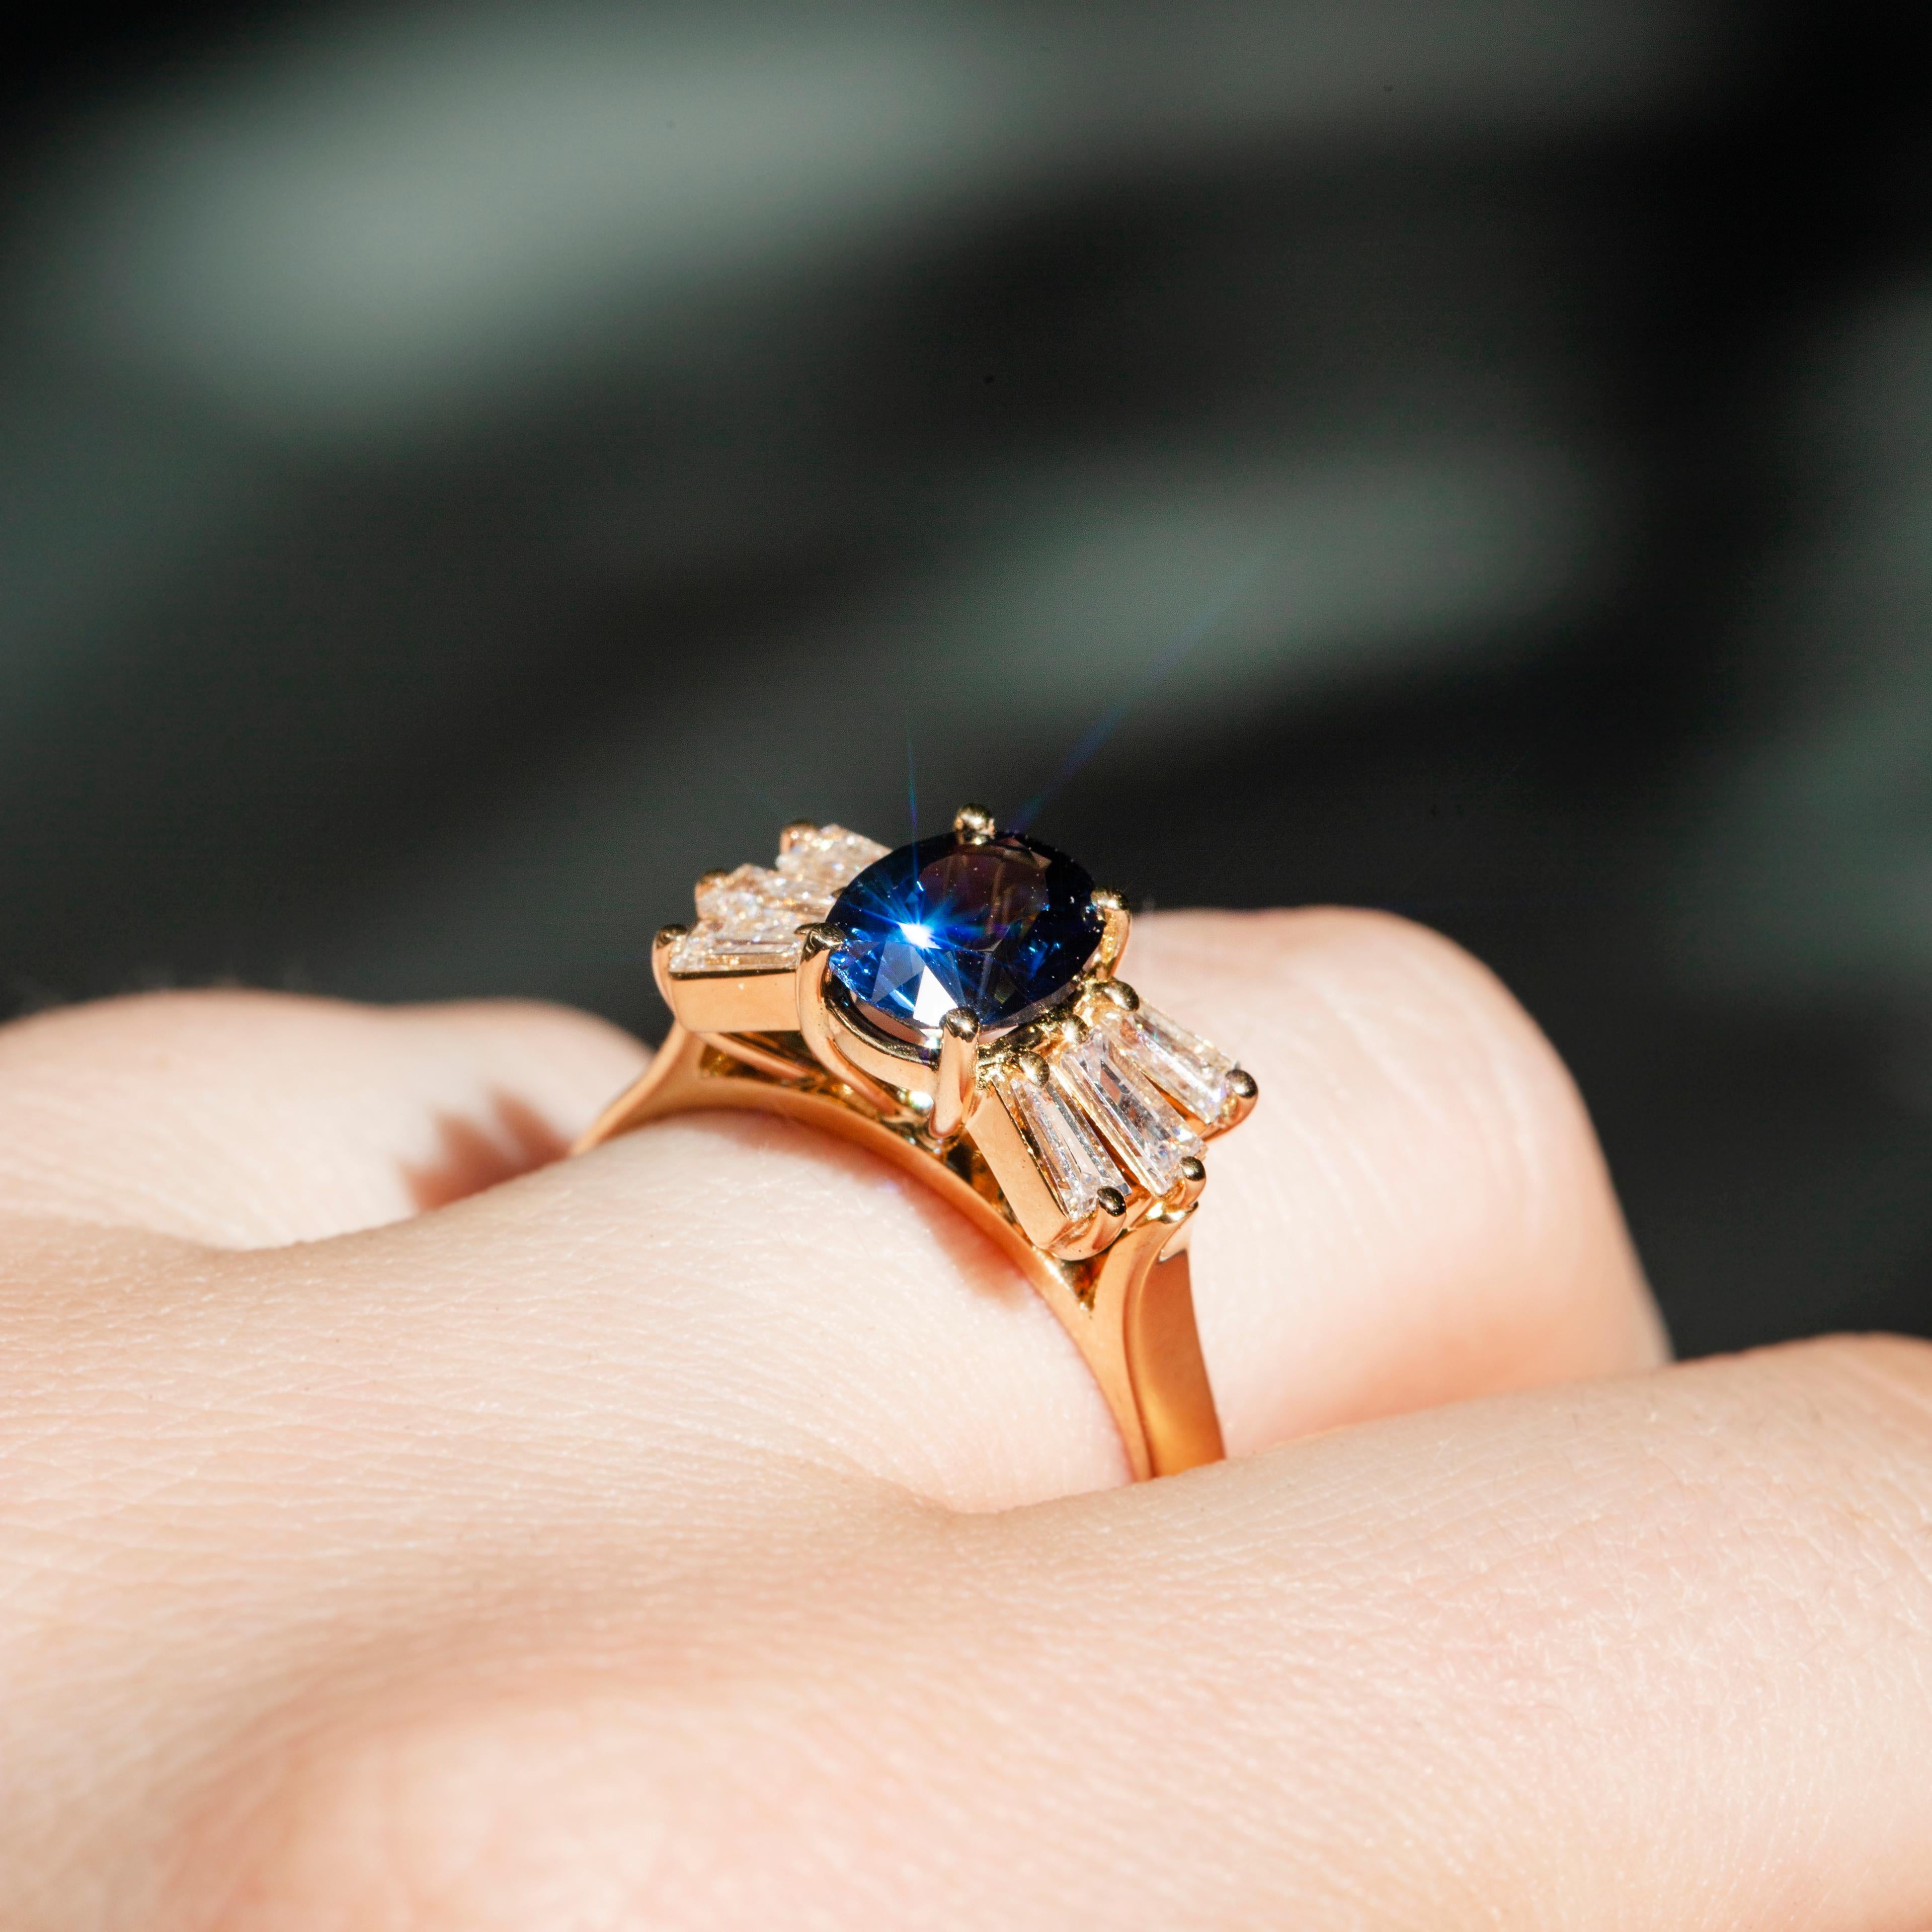 Vintage Circa 1980s 1.78 Carat Sapphire & Baguette Diamond Ring 18ct Yellow Gold For Sale 2